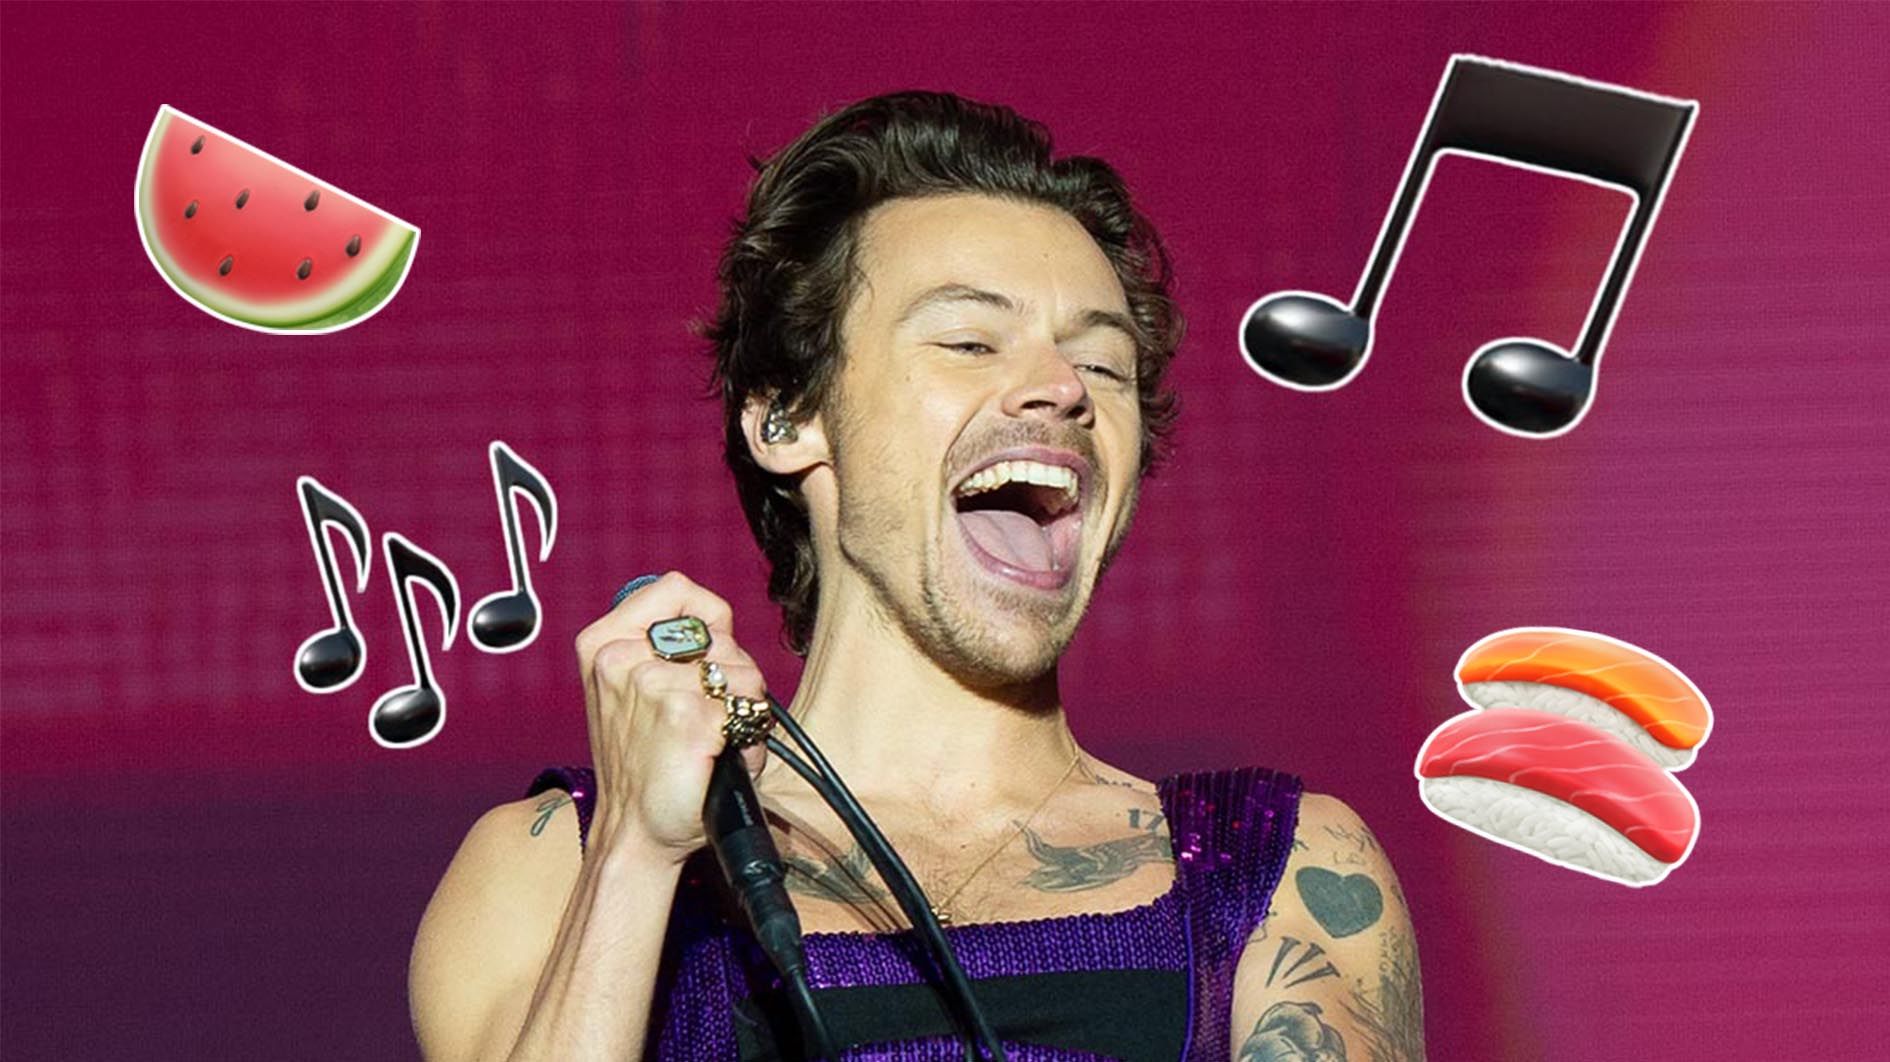 Harry Styles's Elton John Halloween Costume May Have a Secret Meaning